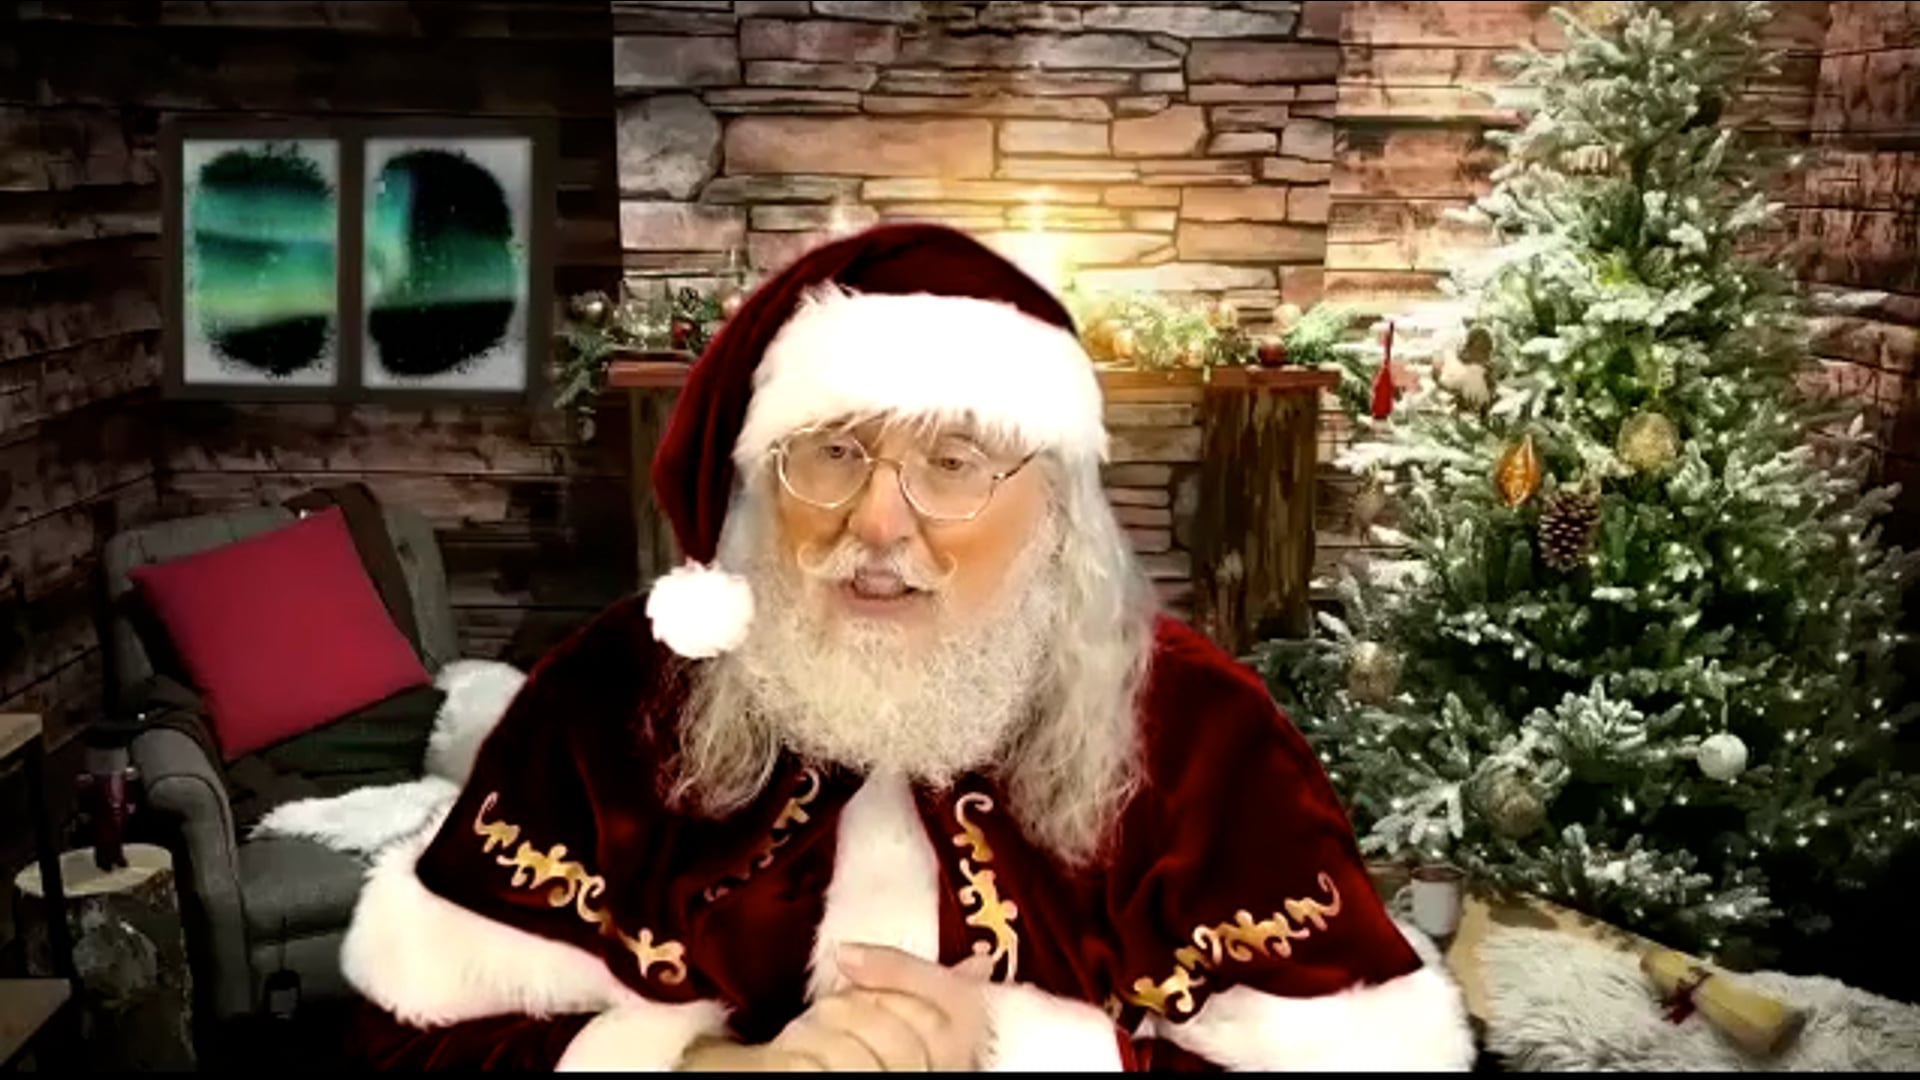 Promotional video thumbnail 1 for Santa Mike of Eastern NC